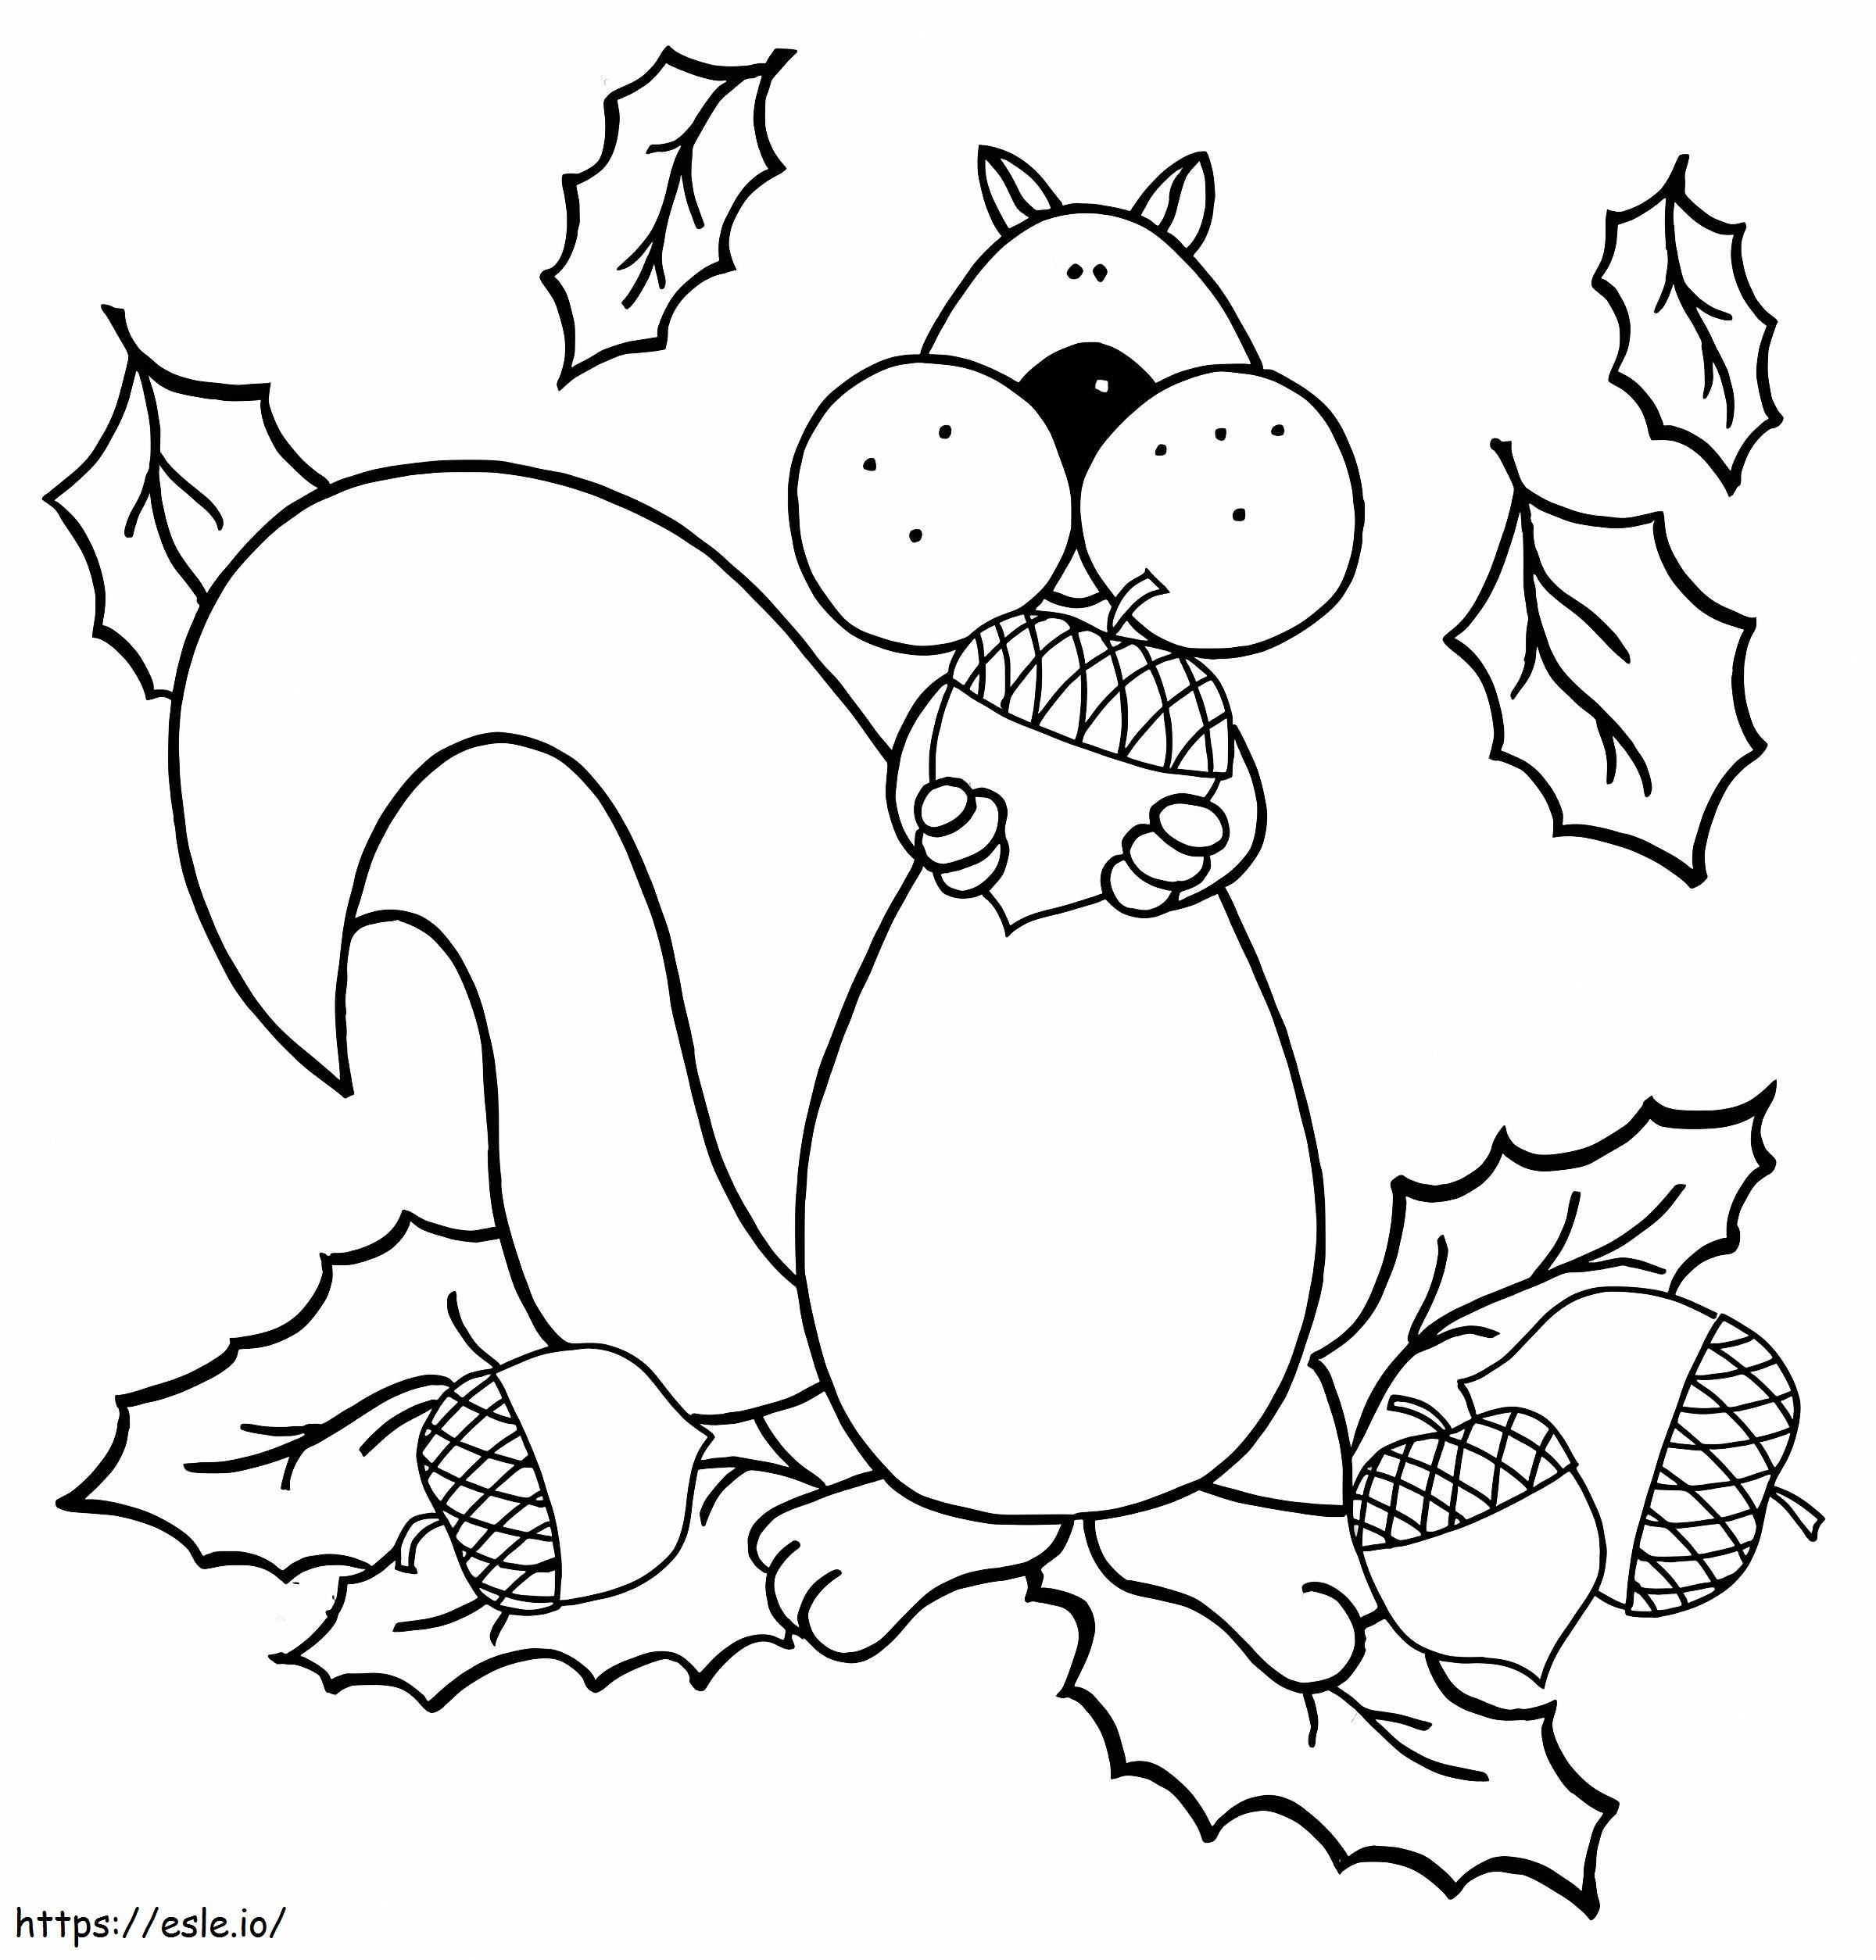 Squirrel Eating Acorn coloring page